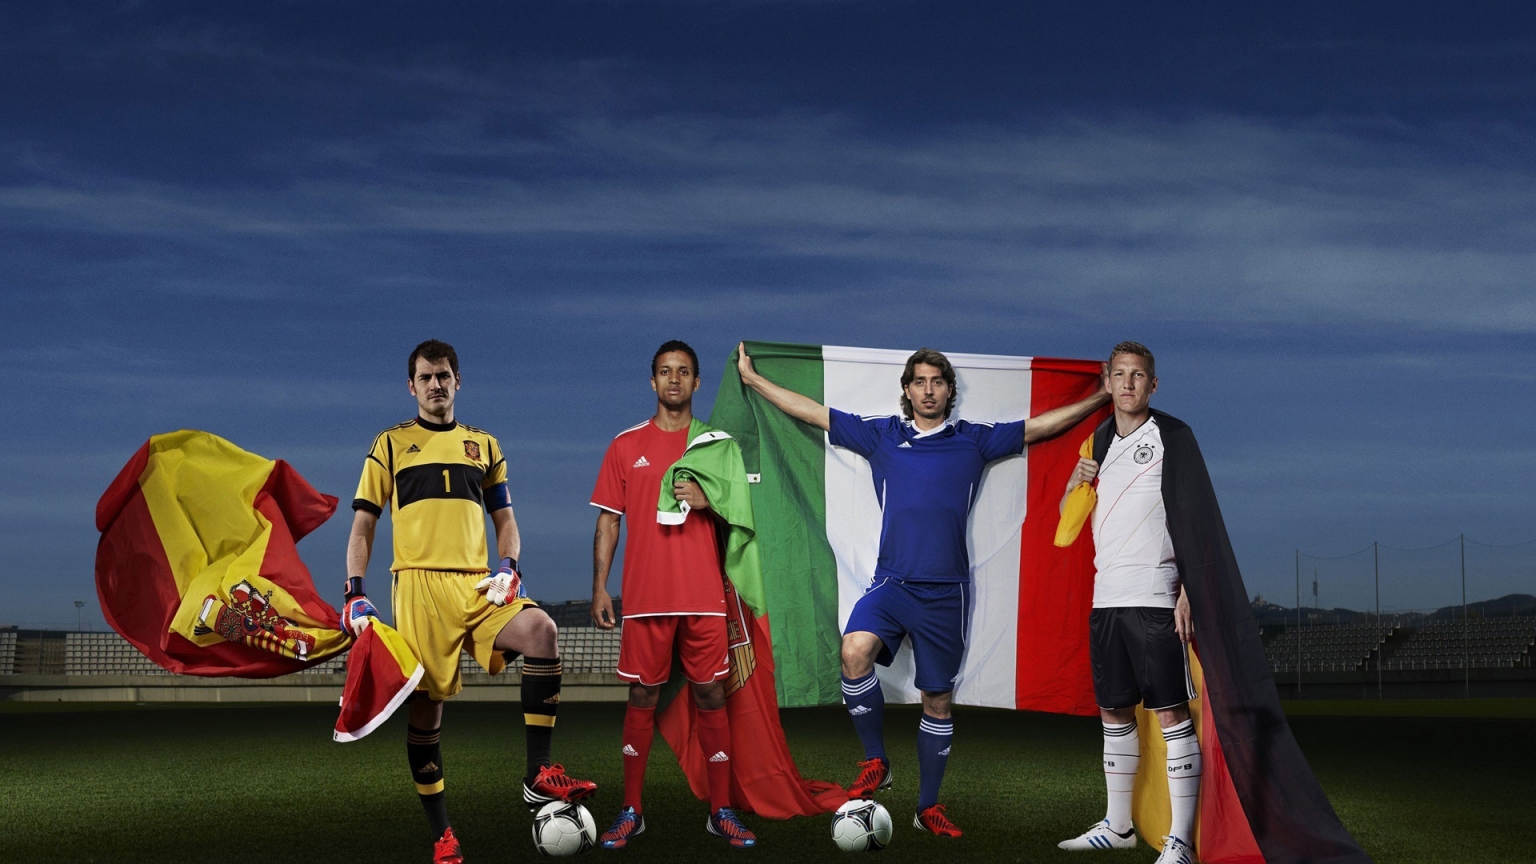 Spain Portugal Italy and Germany for 1536 x 864 HDTV resolution